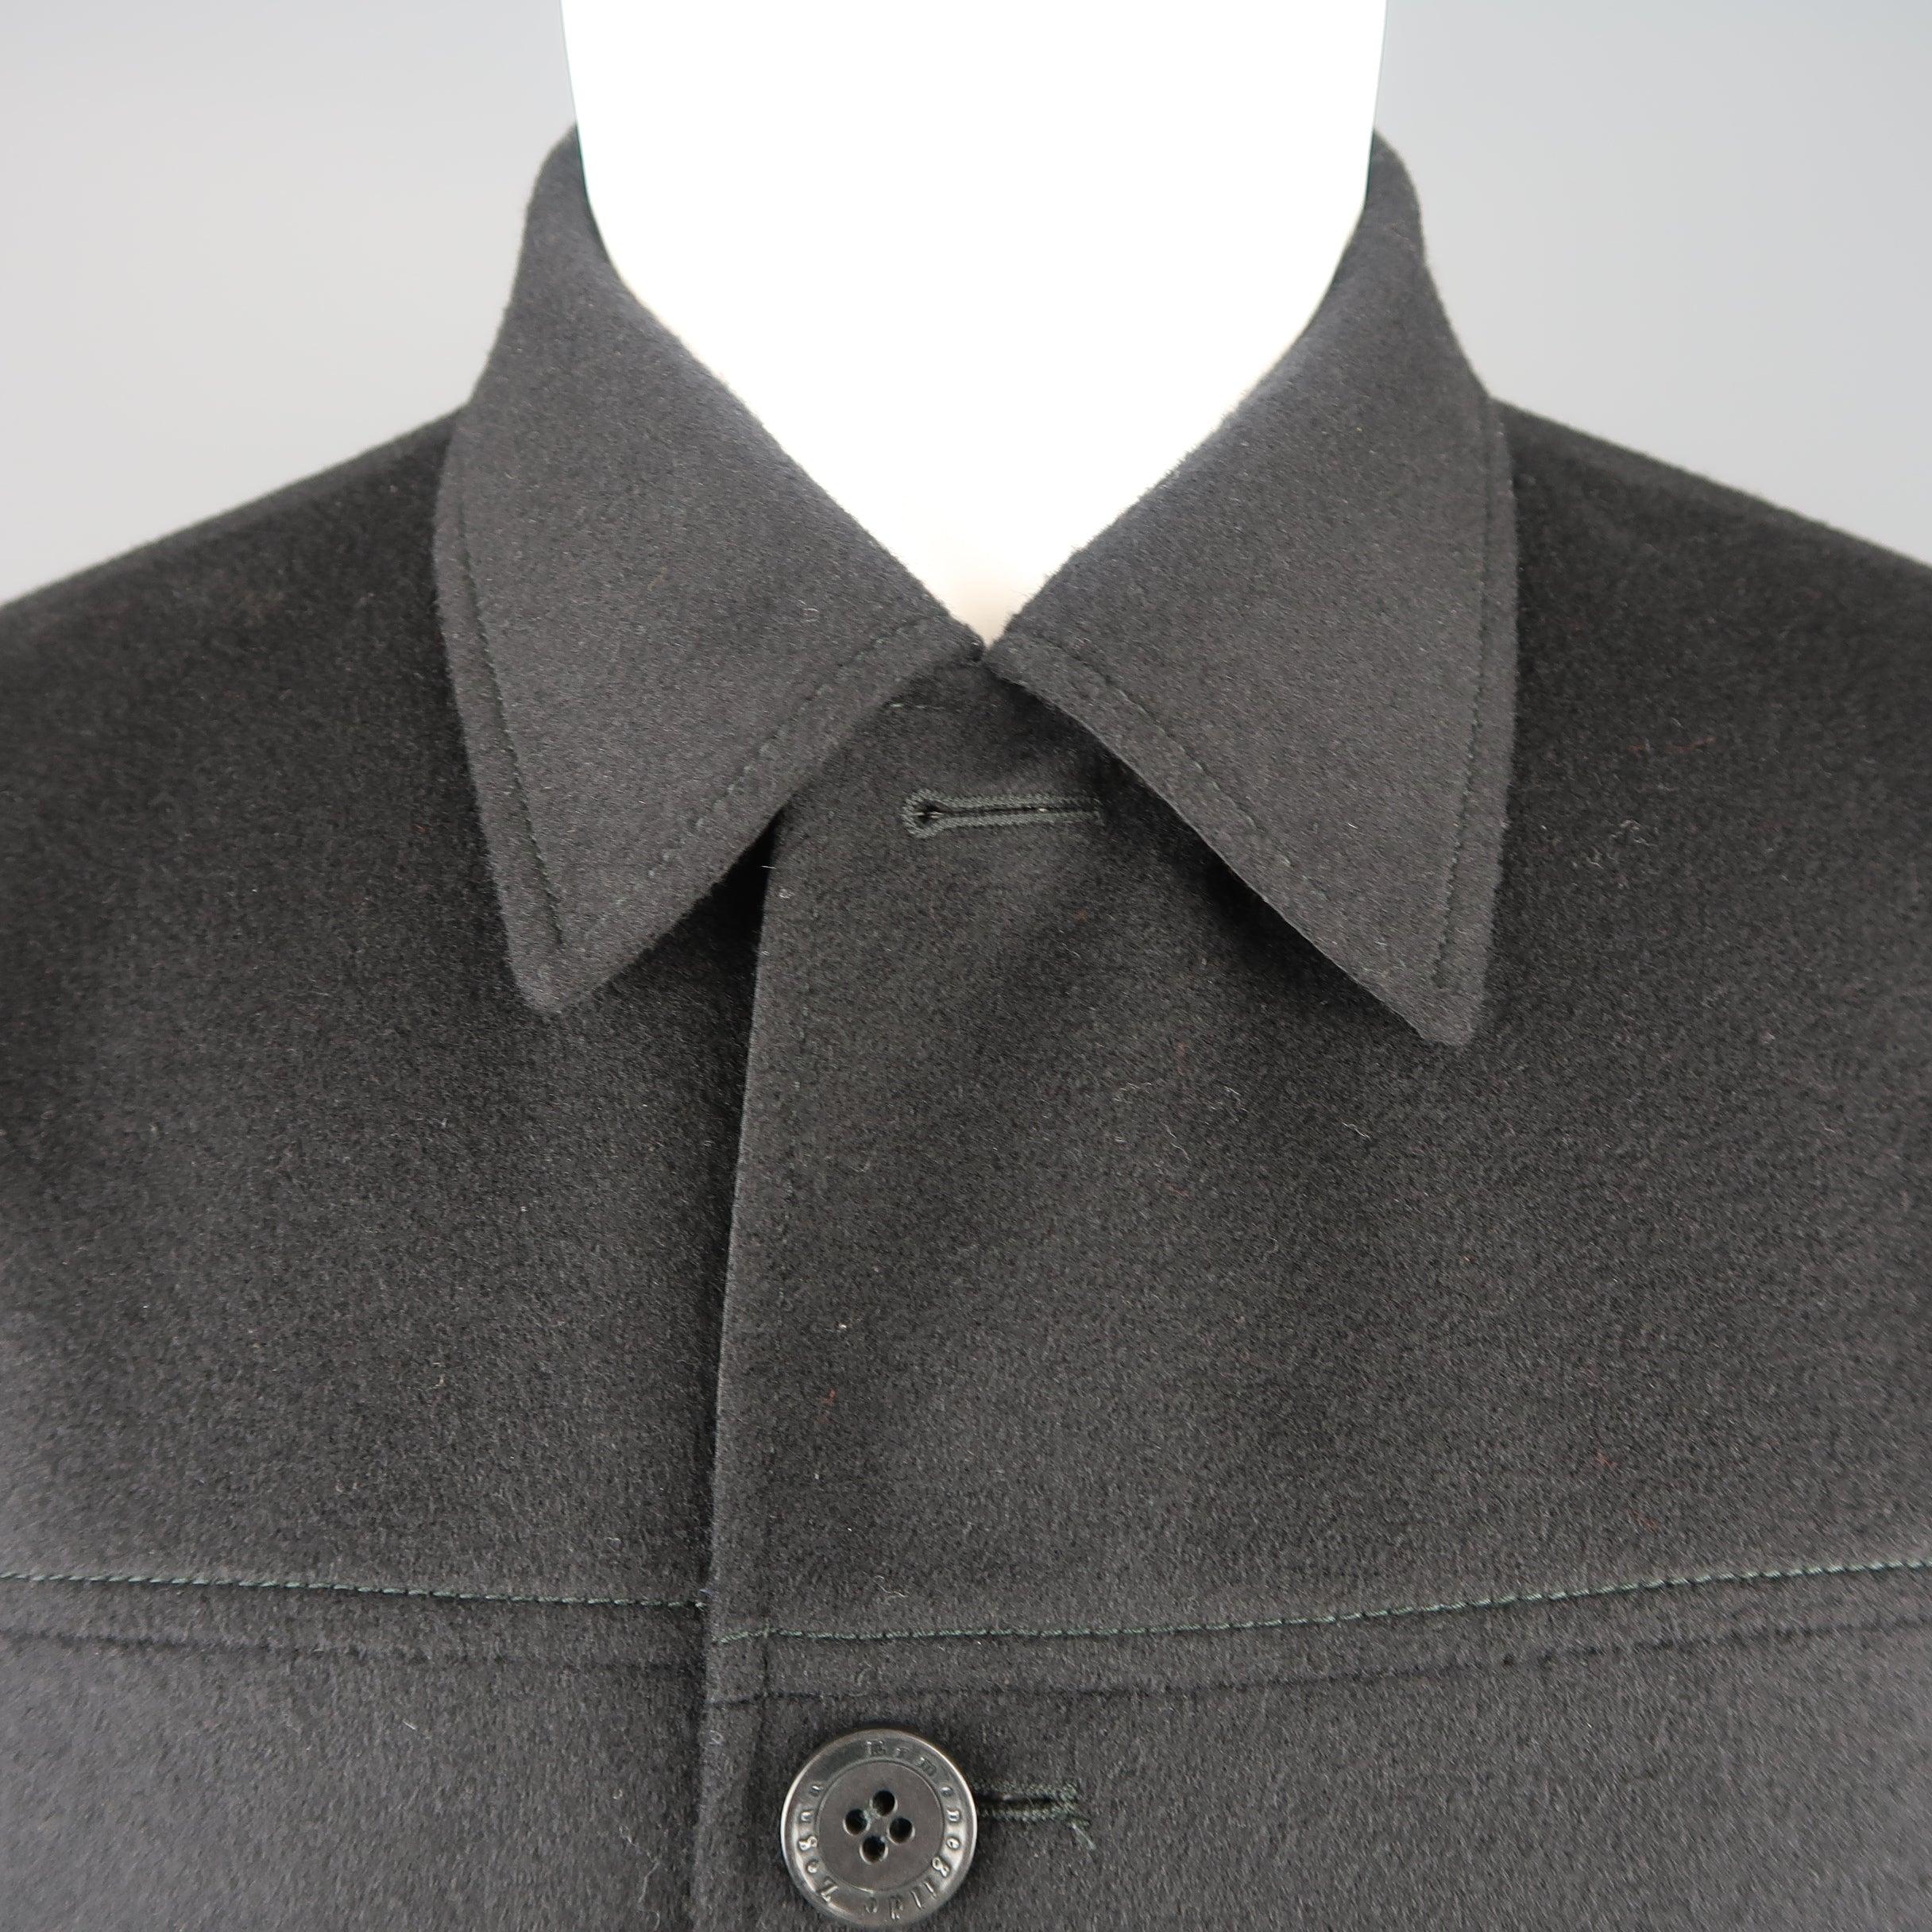 Reversible ERMENEGILDO ZEGNA car coat features a black wool cashmere side with pointed collar and patch pockets and a reverse nylon interior with slit pockets. Minor wear on nylon. Made in Italy.
Good Pre-Owned Condition.
 

Marked:  S/48
